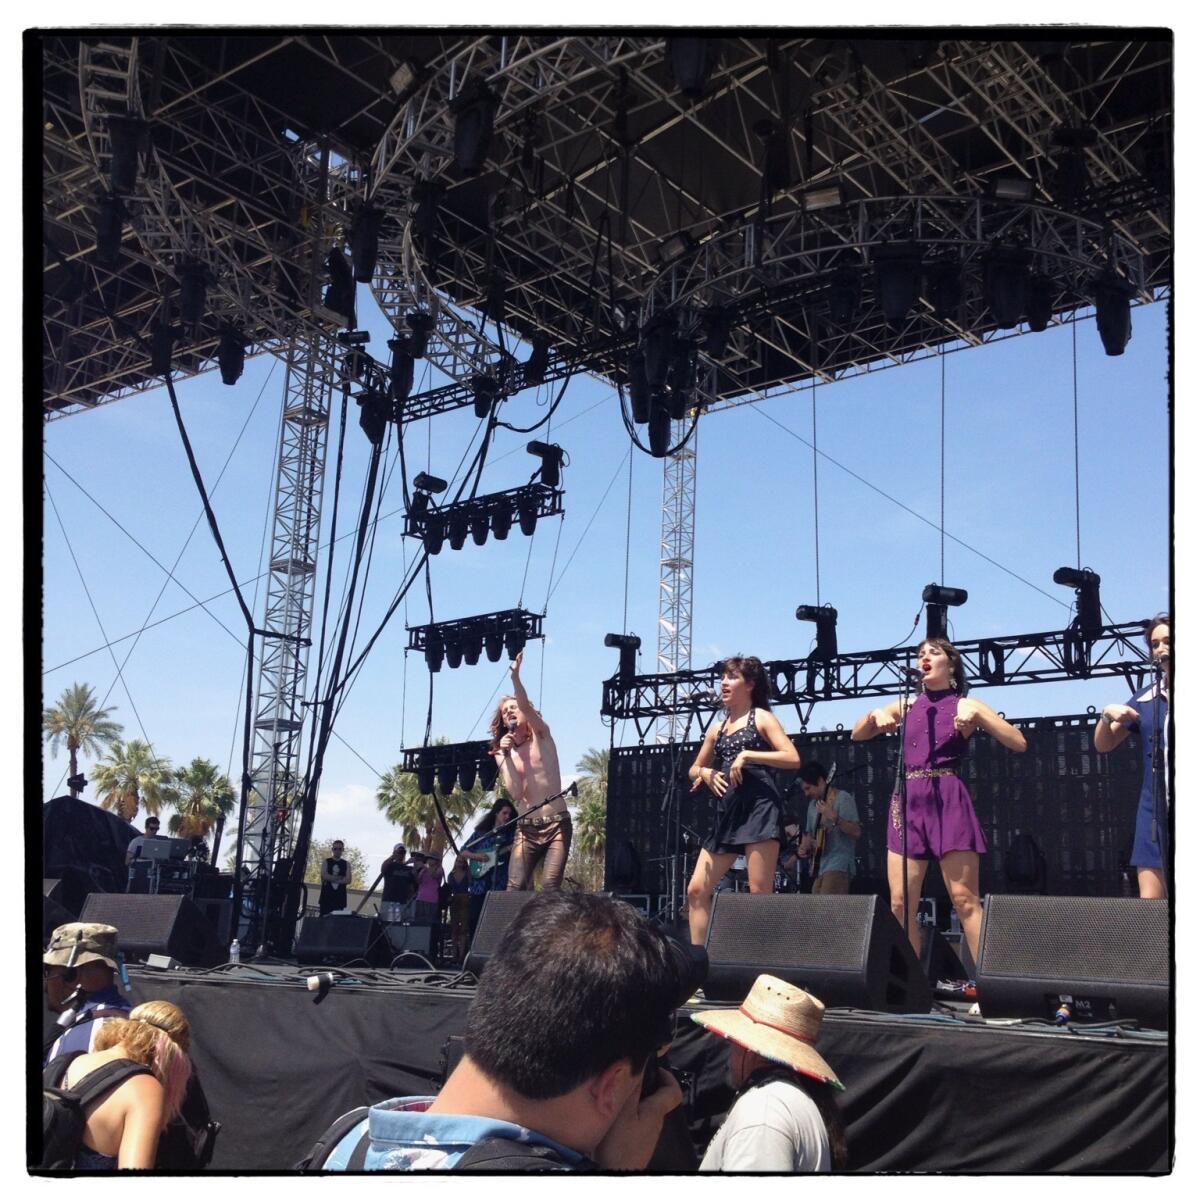 Foxygen singer Sam France grabbed your attention on the Outdoor Stage at the Coachella festival Saturday.